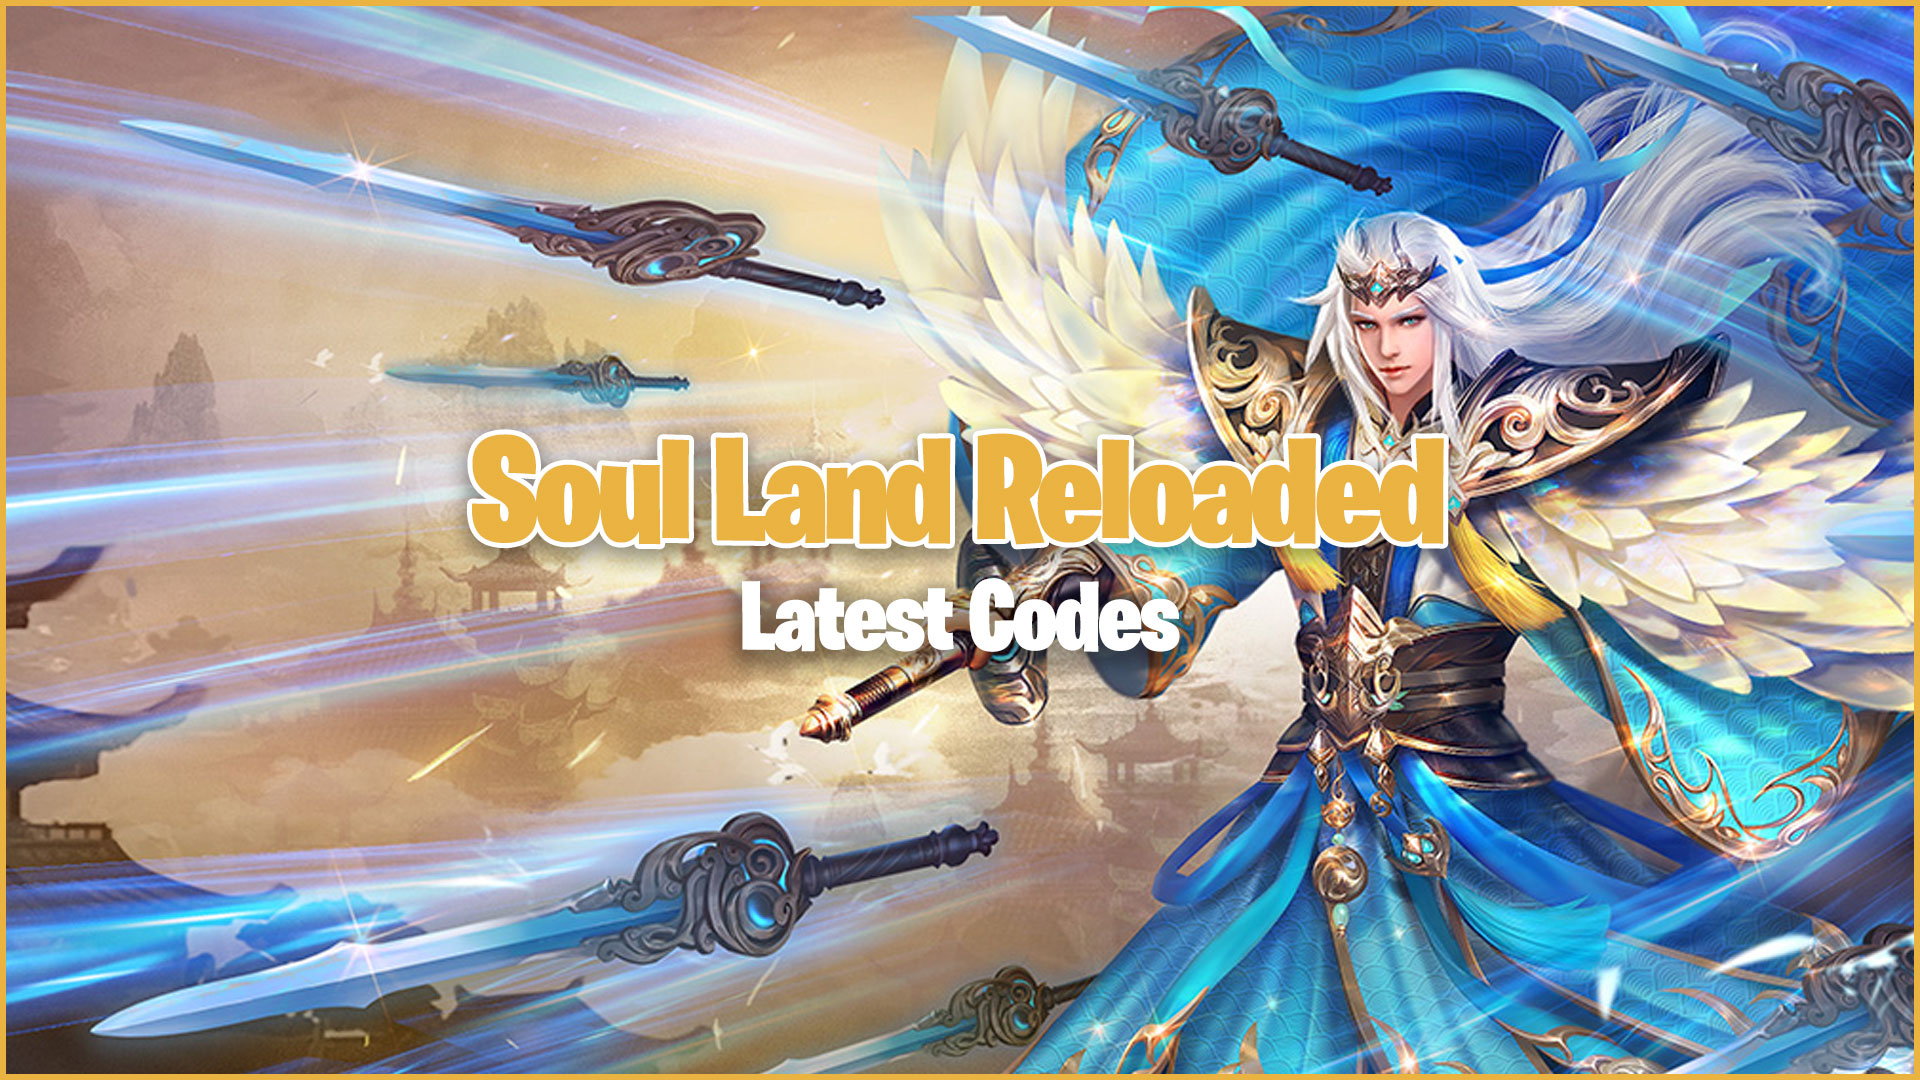 Soul Land Reloaded - 1st-Anniversary Gifts #1 Today's code: aMWRmP From  Oct.5 to Oct.11, we will drop a new code daily for 7 days straight! Redeem  the code for SS+ S.Master Shards